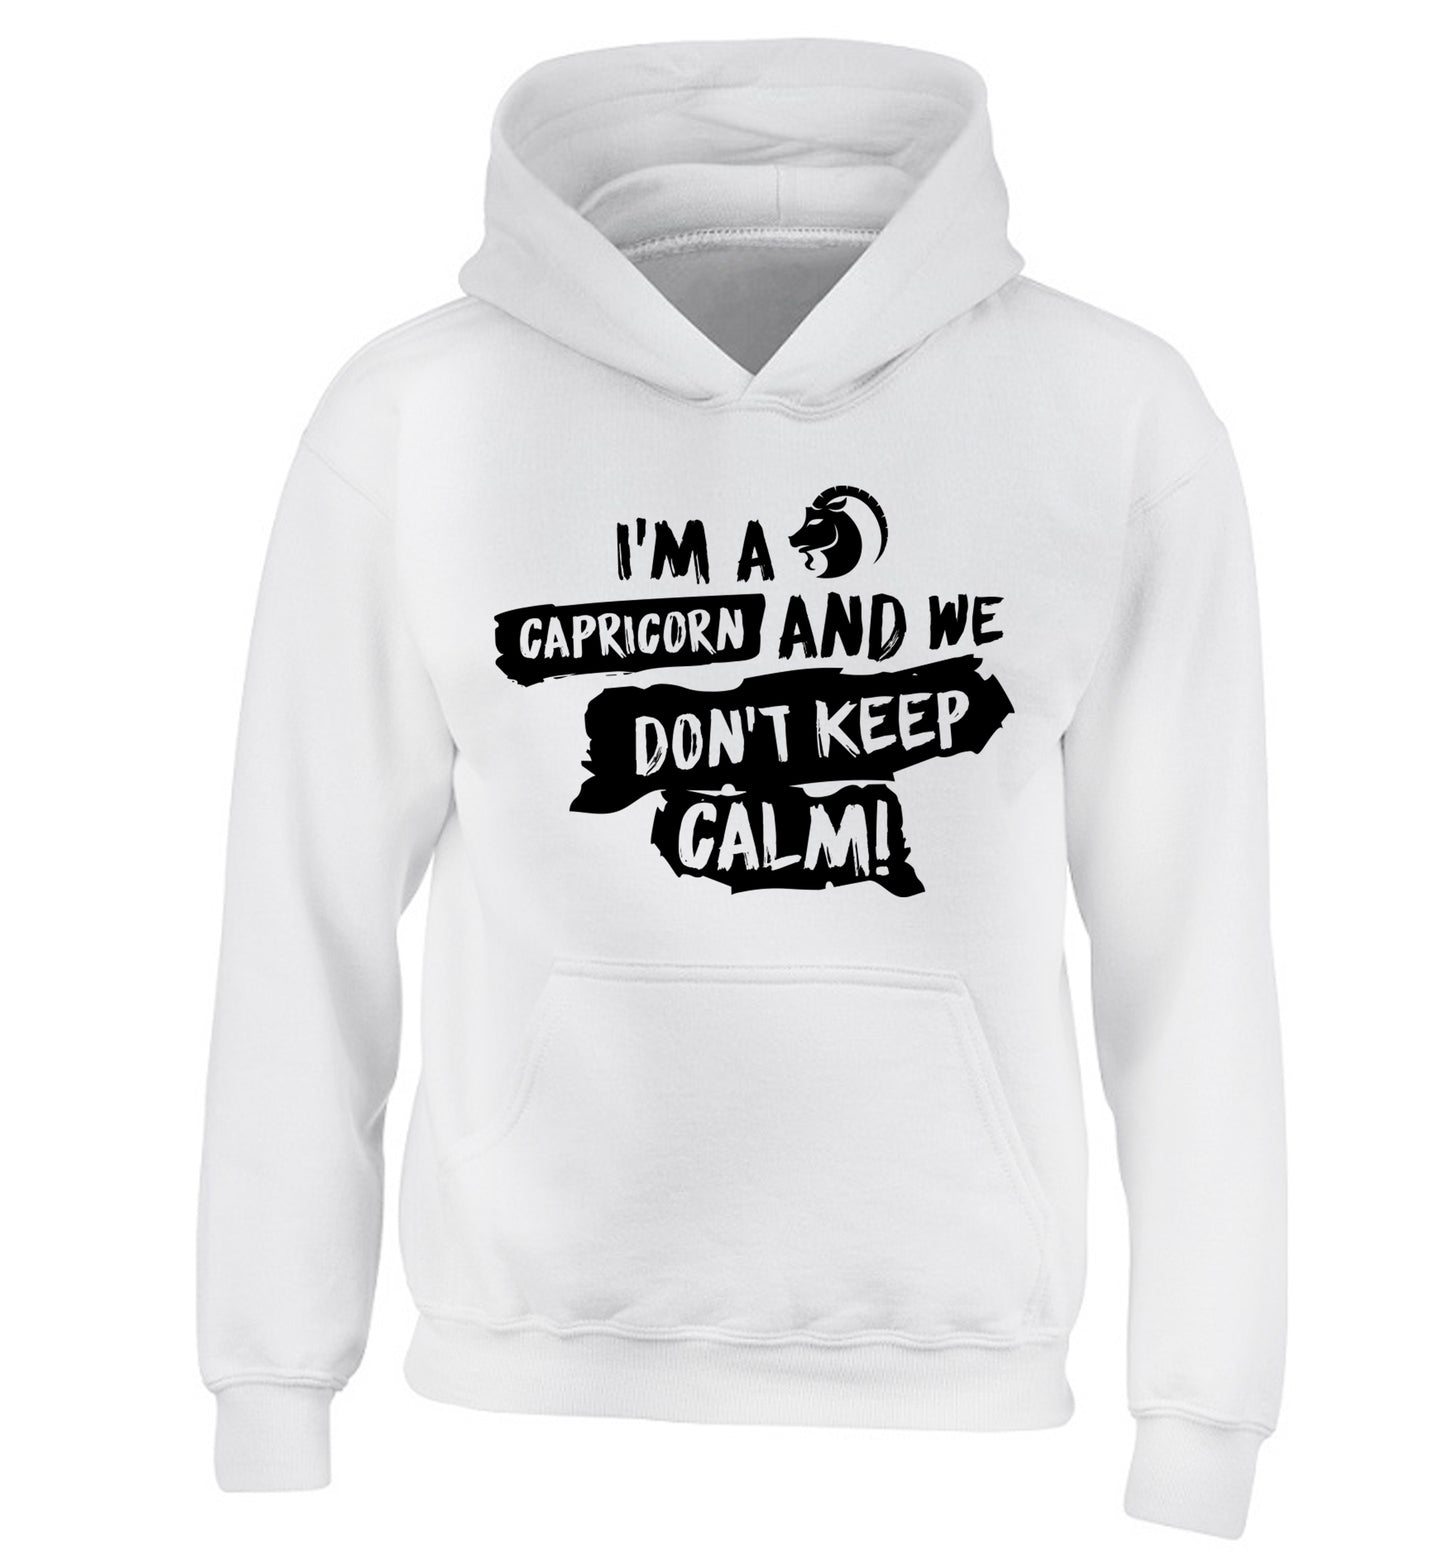 I'm a capricorn and we don't keep calm children's white hoodie 12-13 Years